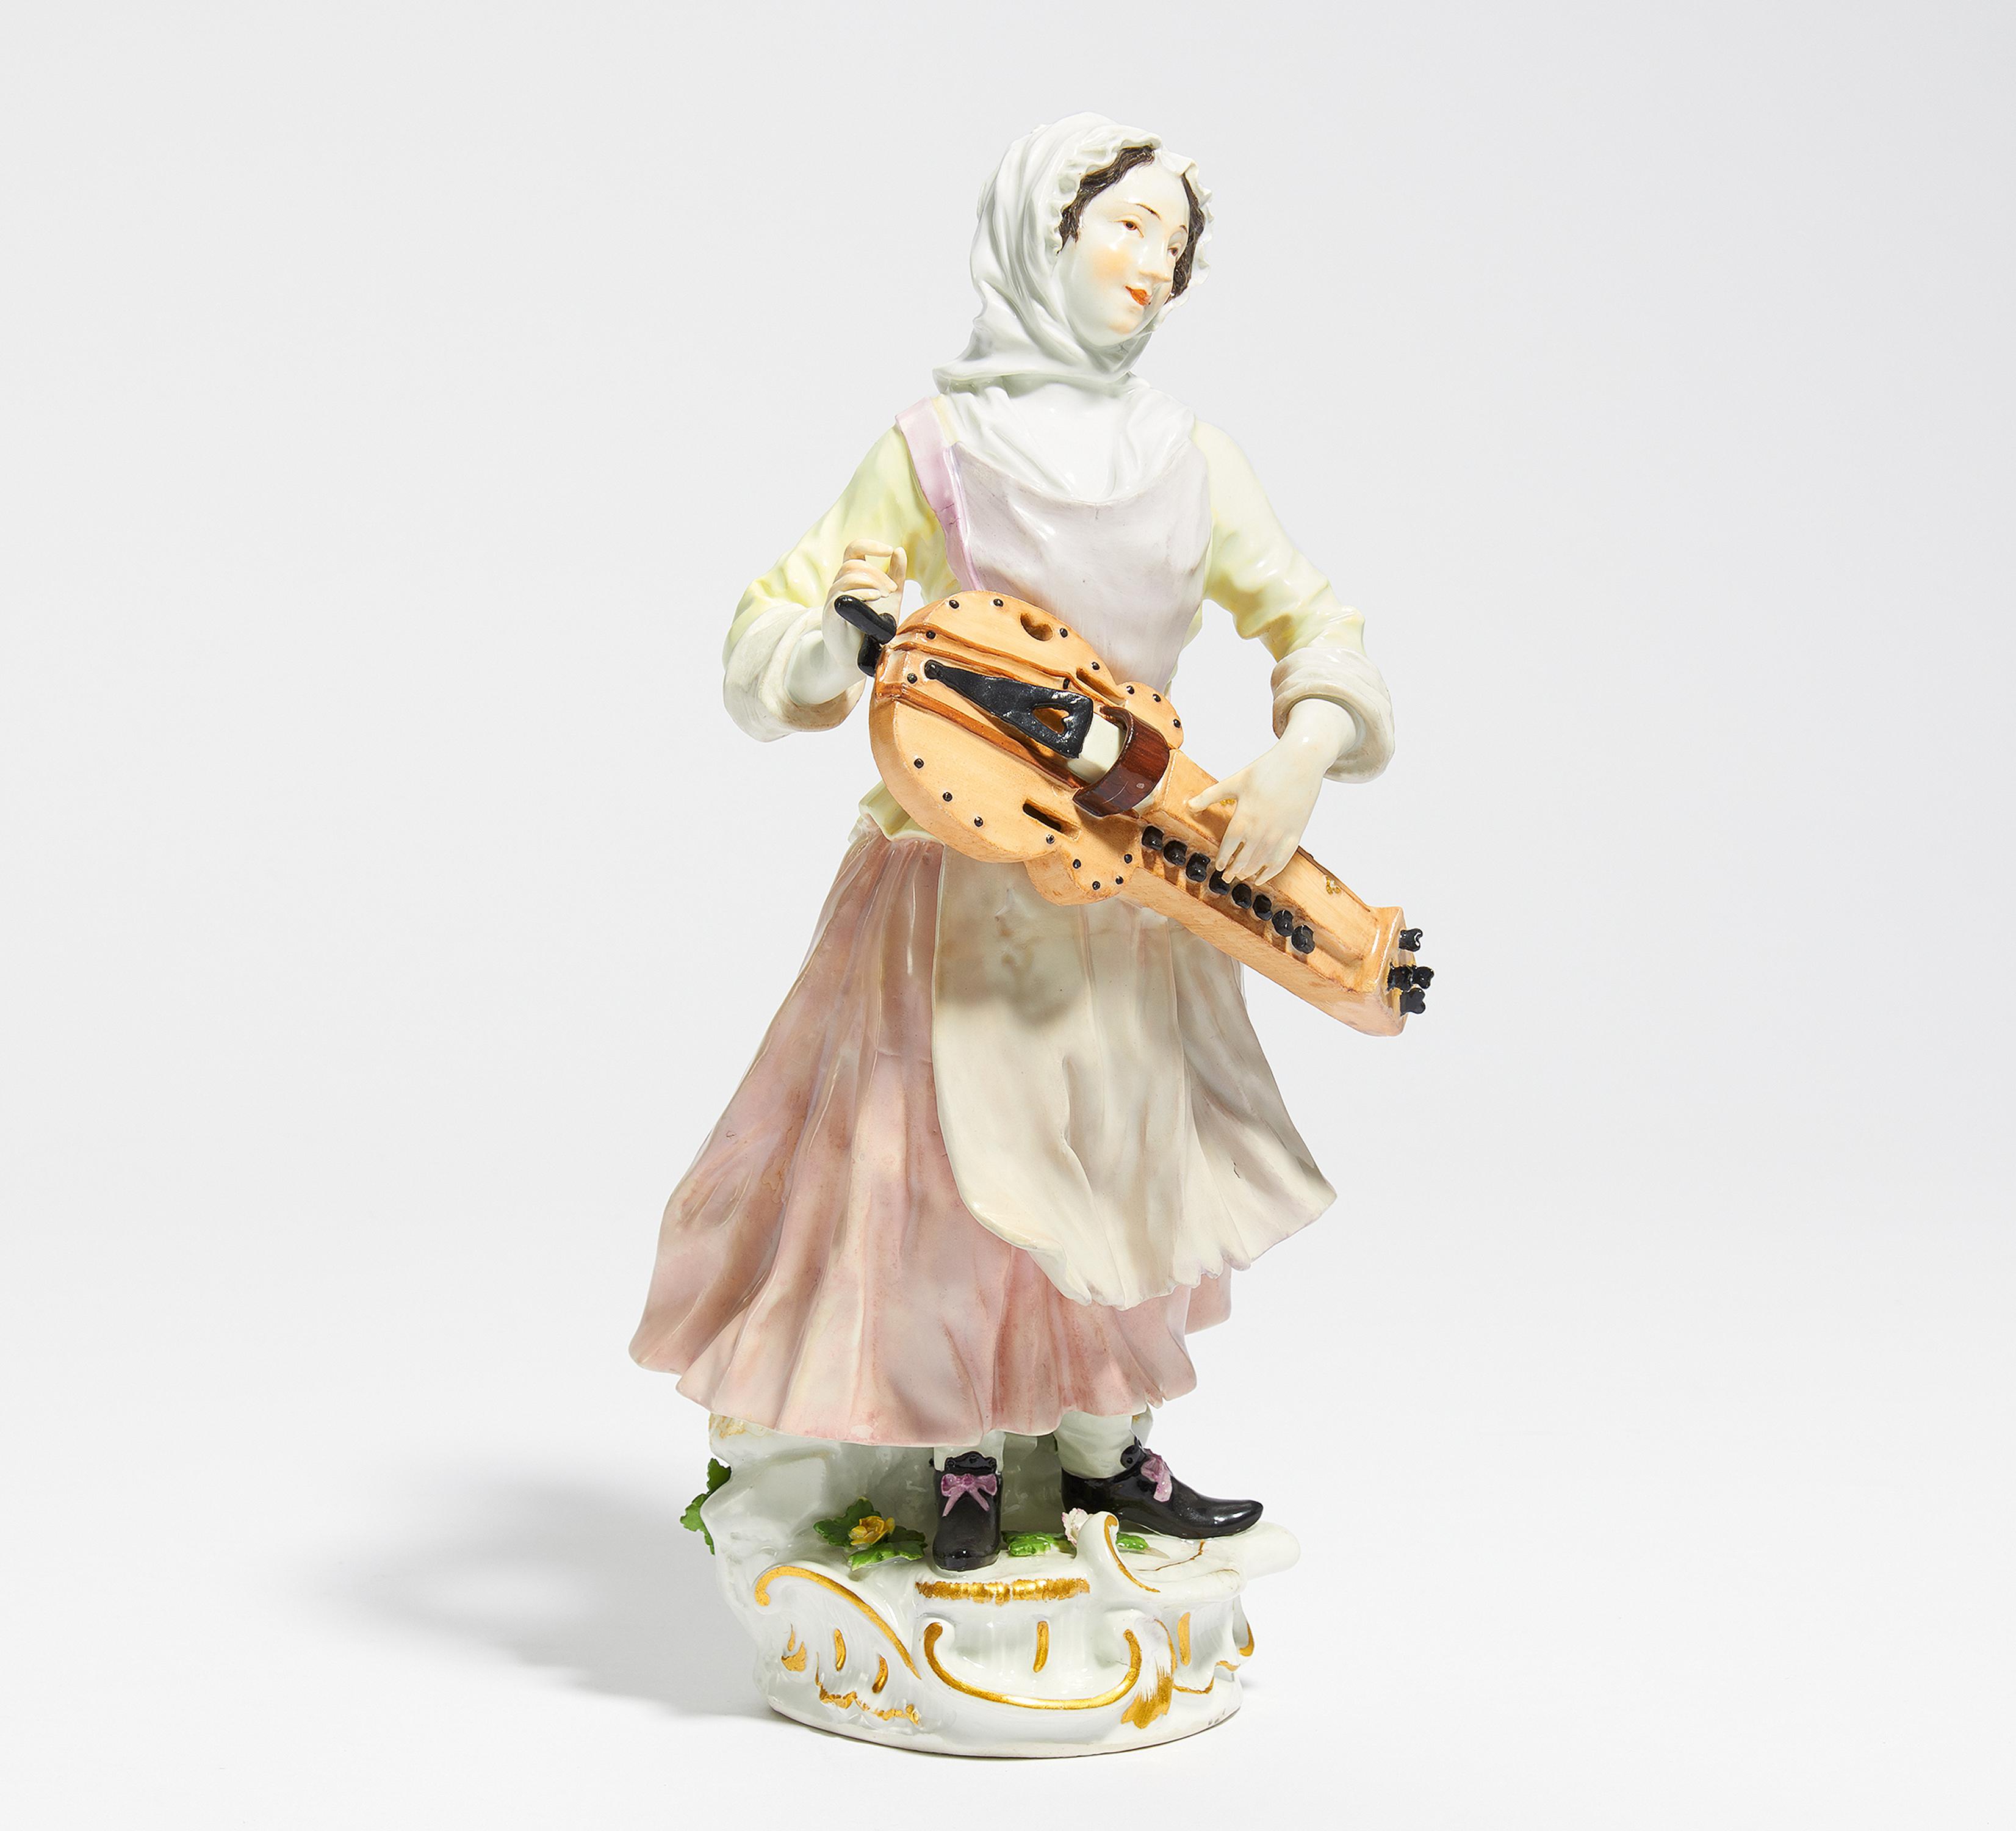 LARGE PORCELAIN FIGURINE OF A WOMAN PLAYING THE HURDY-GURDY. Meissen. 18th century. Model J.J.